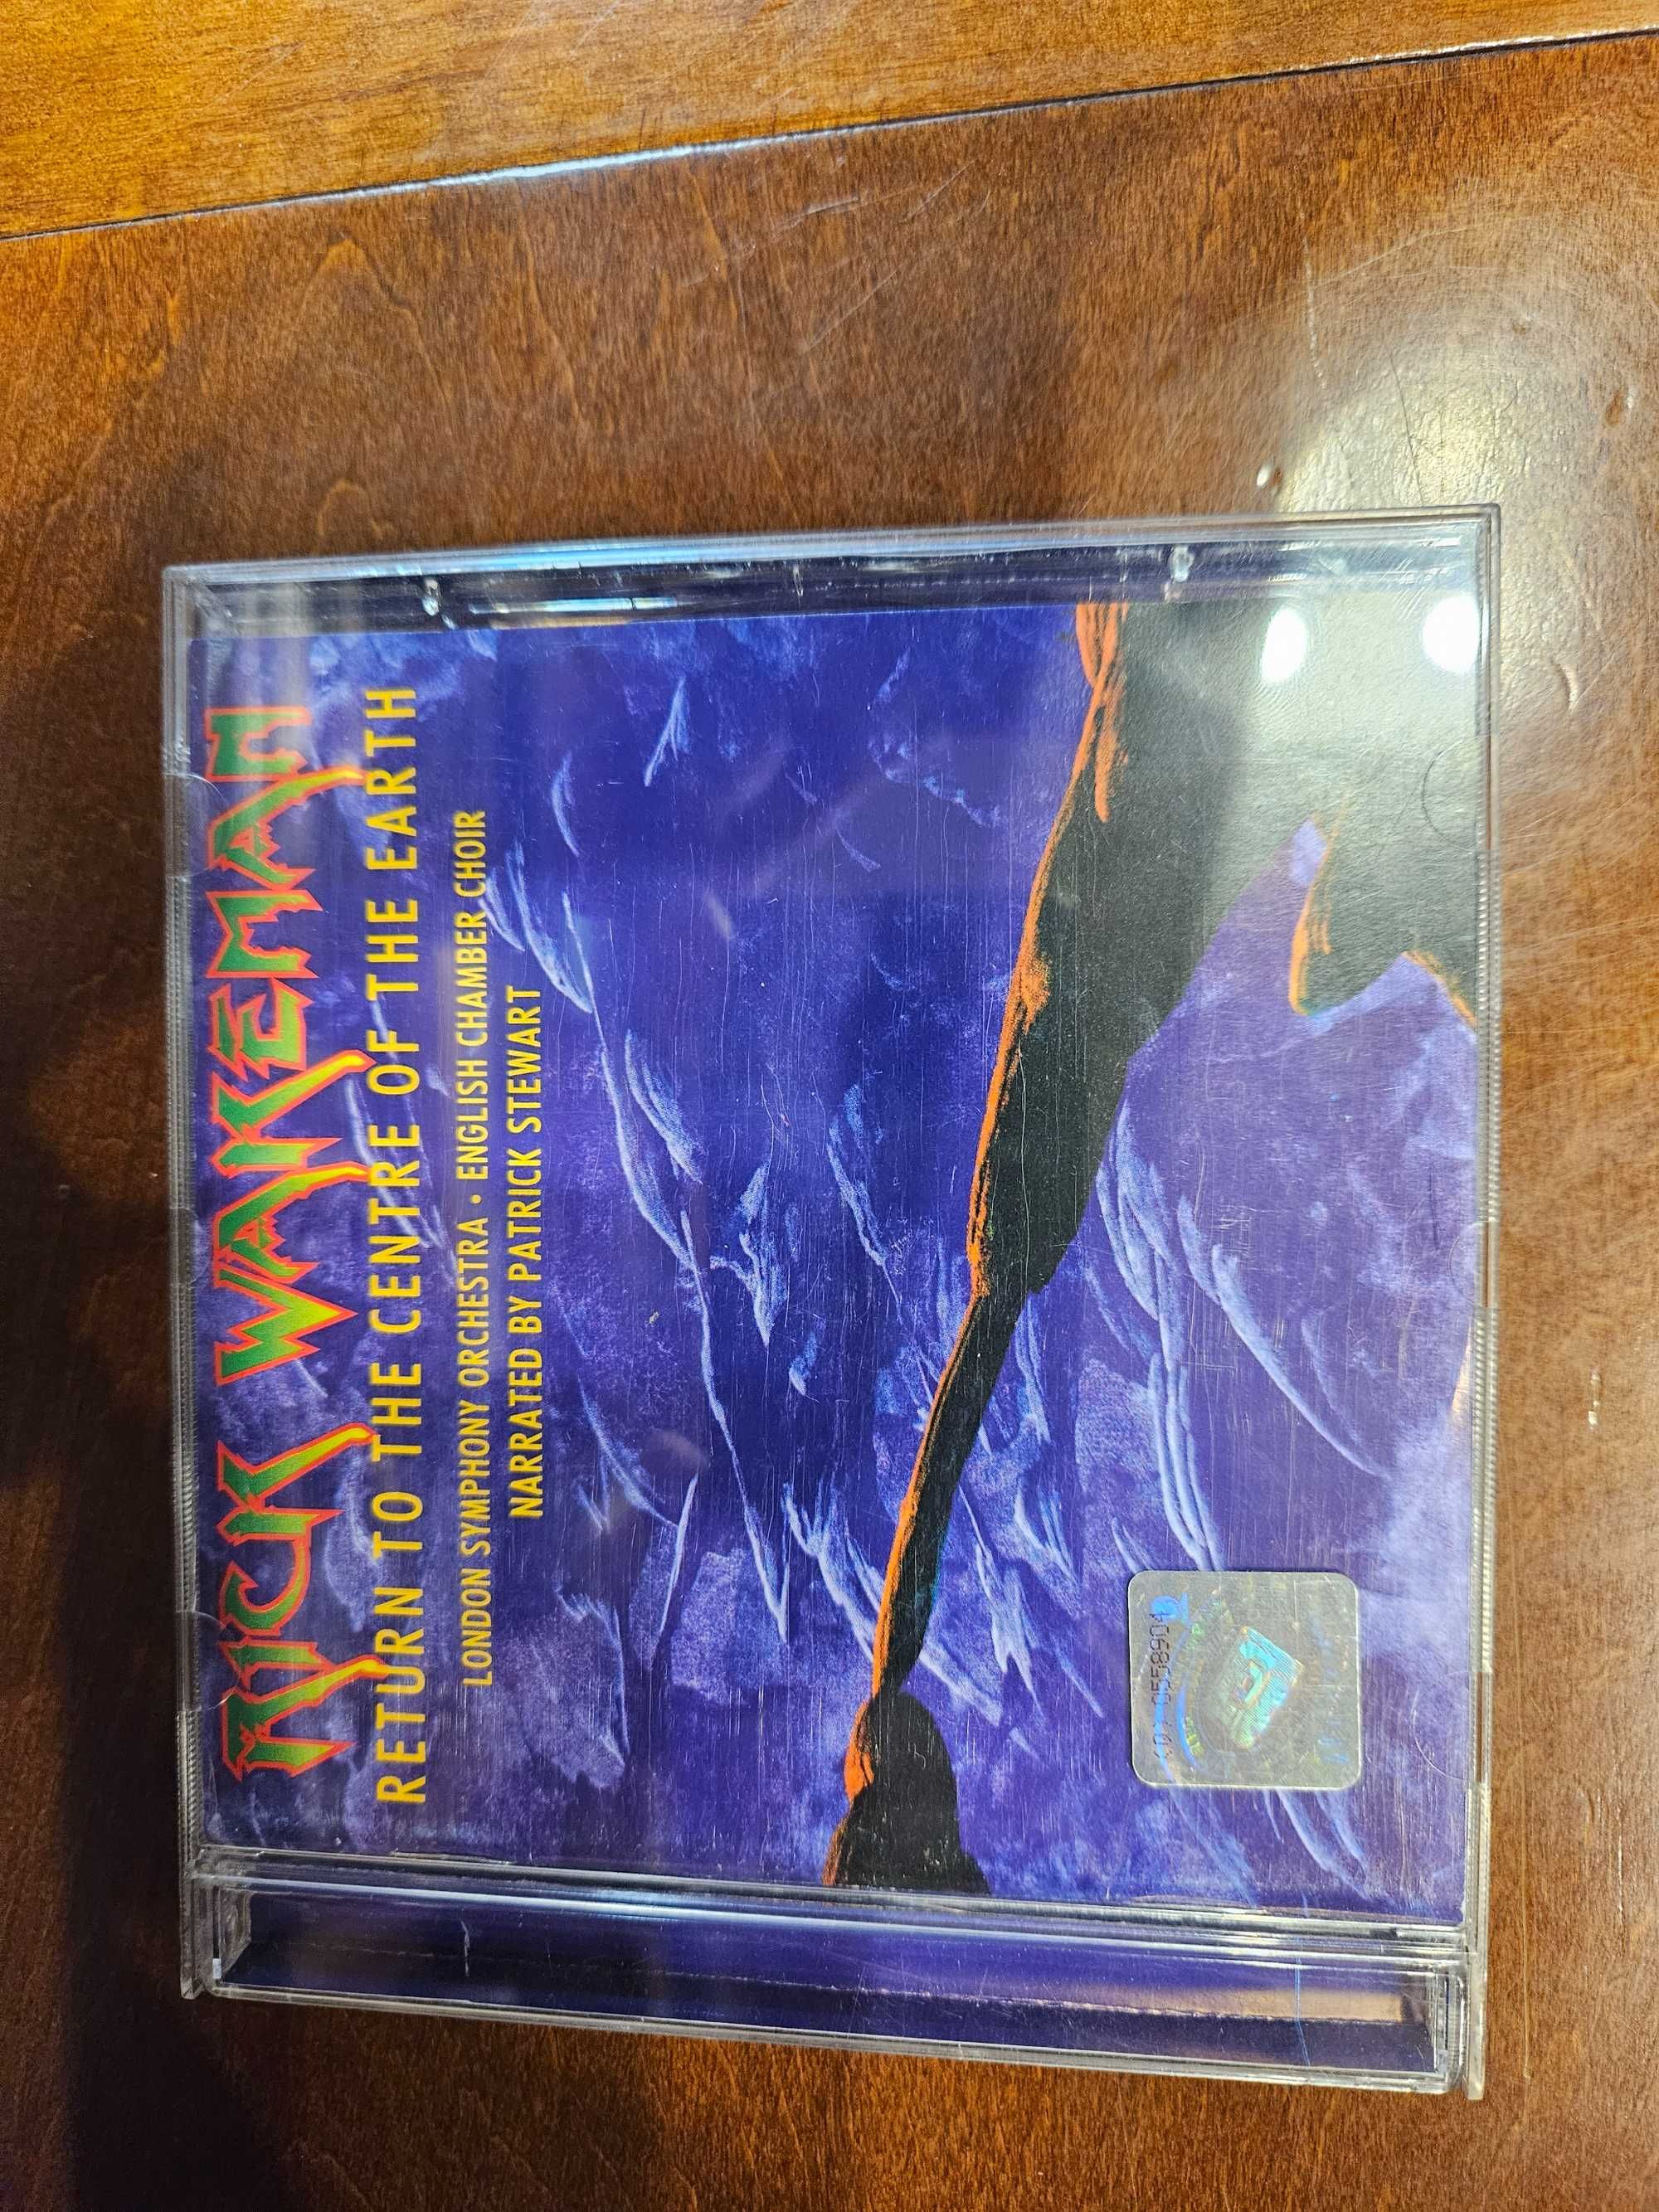 CD Return to the Centre of the Earth Rick Wakeman